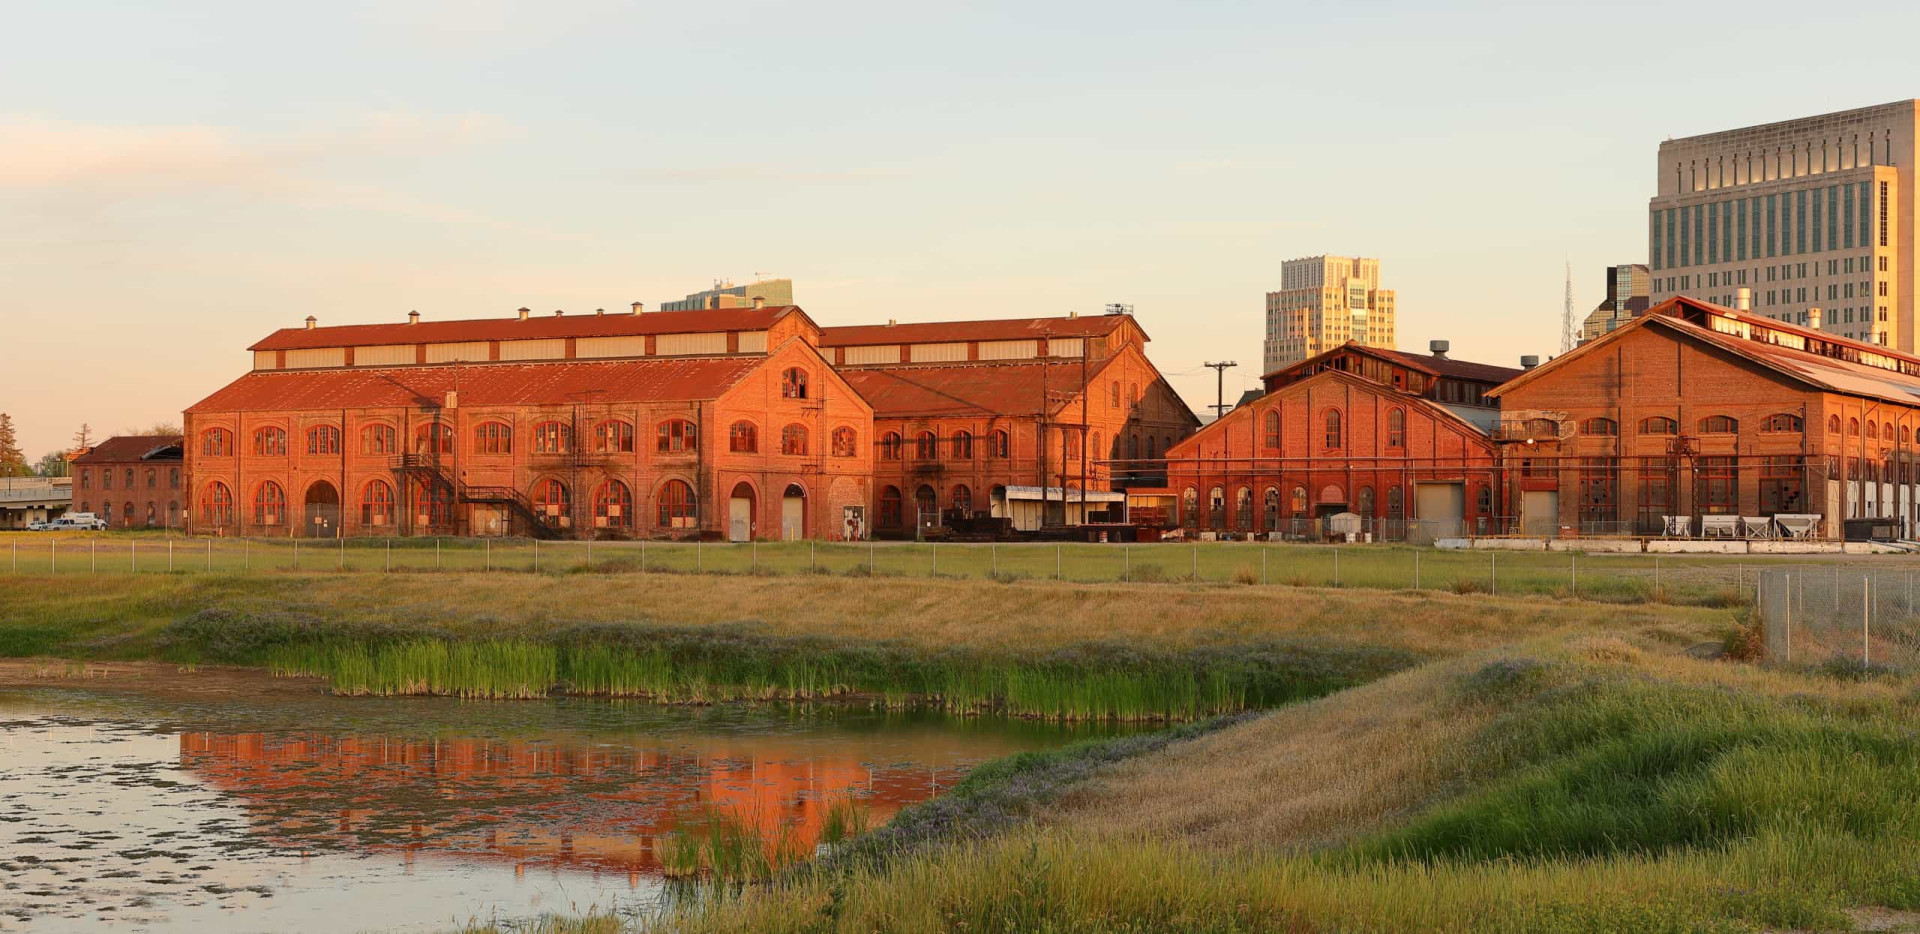 <p>Steam buffs and anyone interested in 19th-century industrial architecture will have their imaginations well and truly stoked at the sprawling Sacramento Locomotive Works.</p><p>See also: <a href="https://www.starsinsider.com/travel/287598/dark-tourism-following-a-gruesome-travel-itinerary">Dark tourism: following a gruesome travel itinerary</a></p><p><a href="https://www.msn.com/en-us/community/channel/vid-7xx8mnucu55yw63we9va2gwr7uihbxwc68fxqp25x6tg4ftibpra?cvid=94631541bc0f4f89bfd59158d696ad7e">Follow us and access great exclusive content every day</a></p>